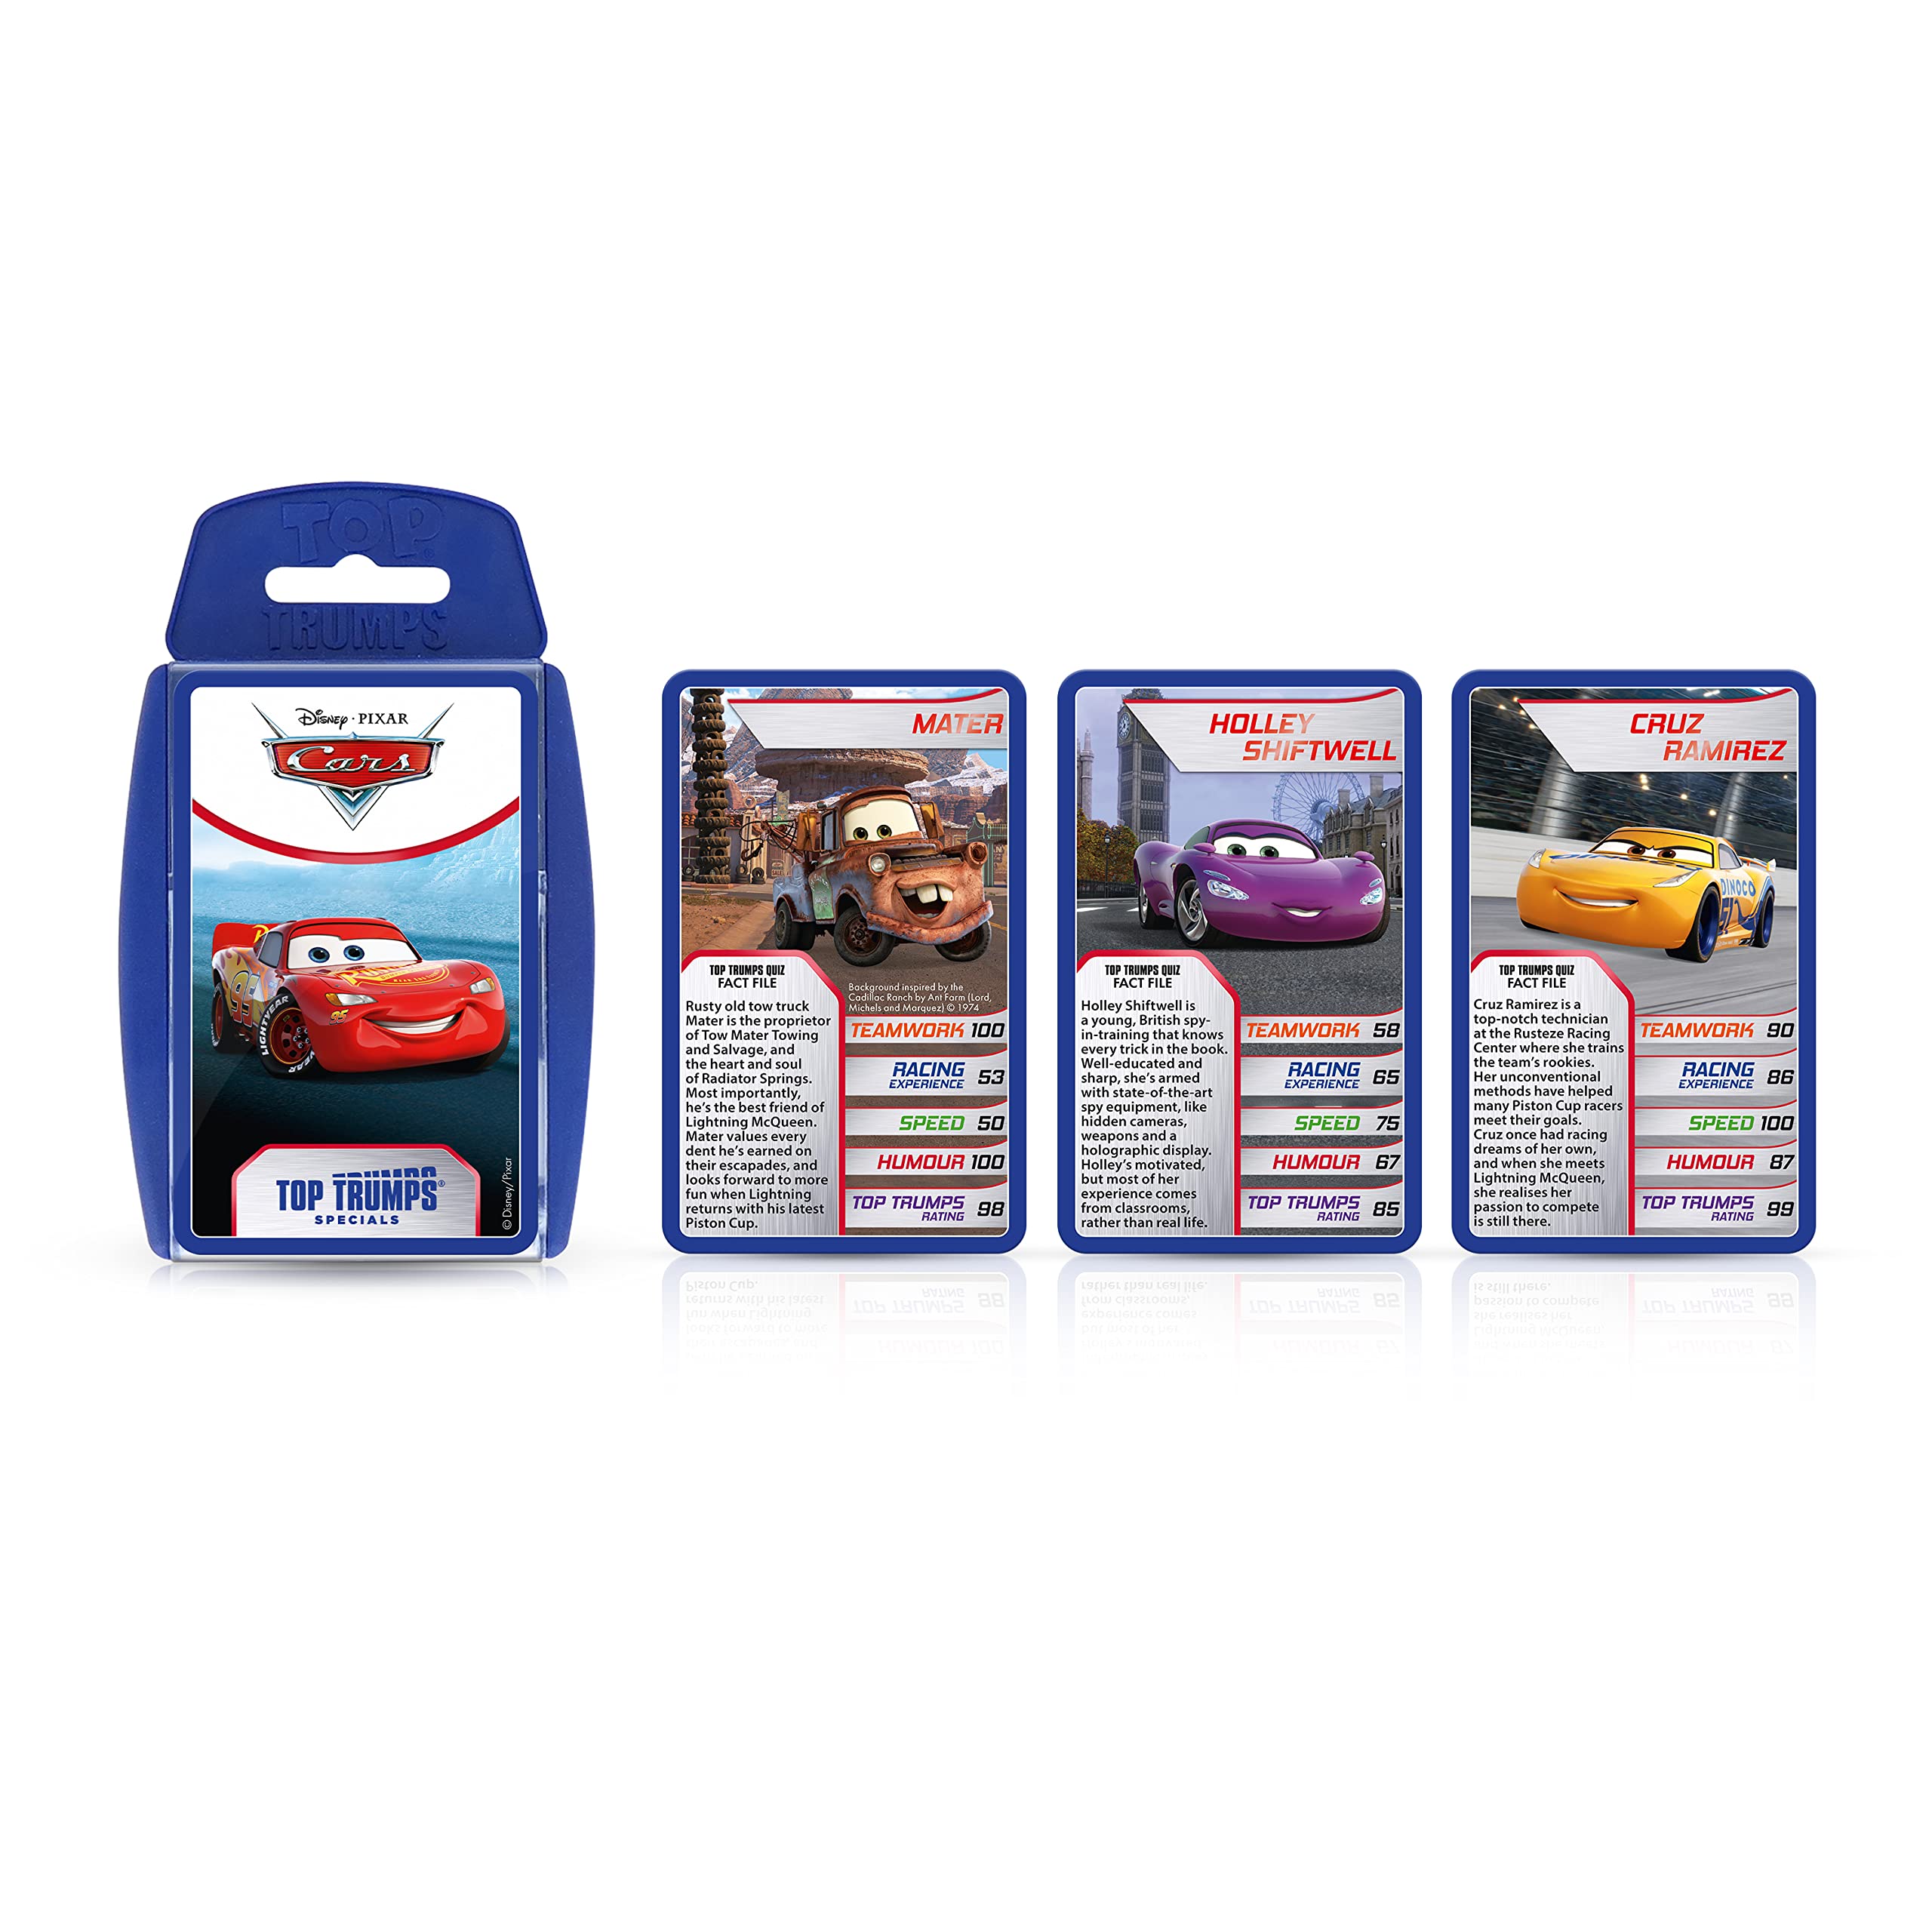 Top Trumps Cars Pixar Entertaining Game Exploring Cars Characters Like Lightning McQueen, Mater, and More|Fun Family Game for Ages 6 & up